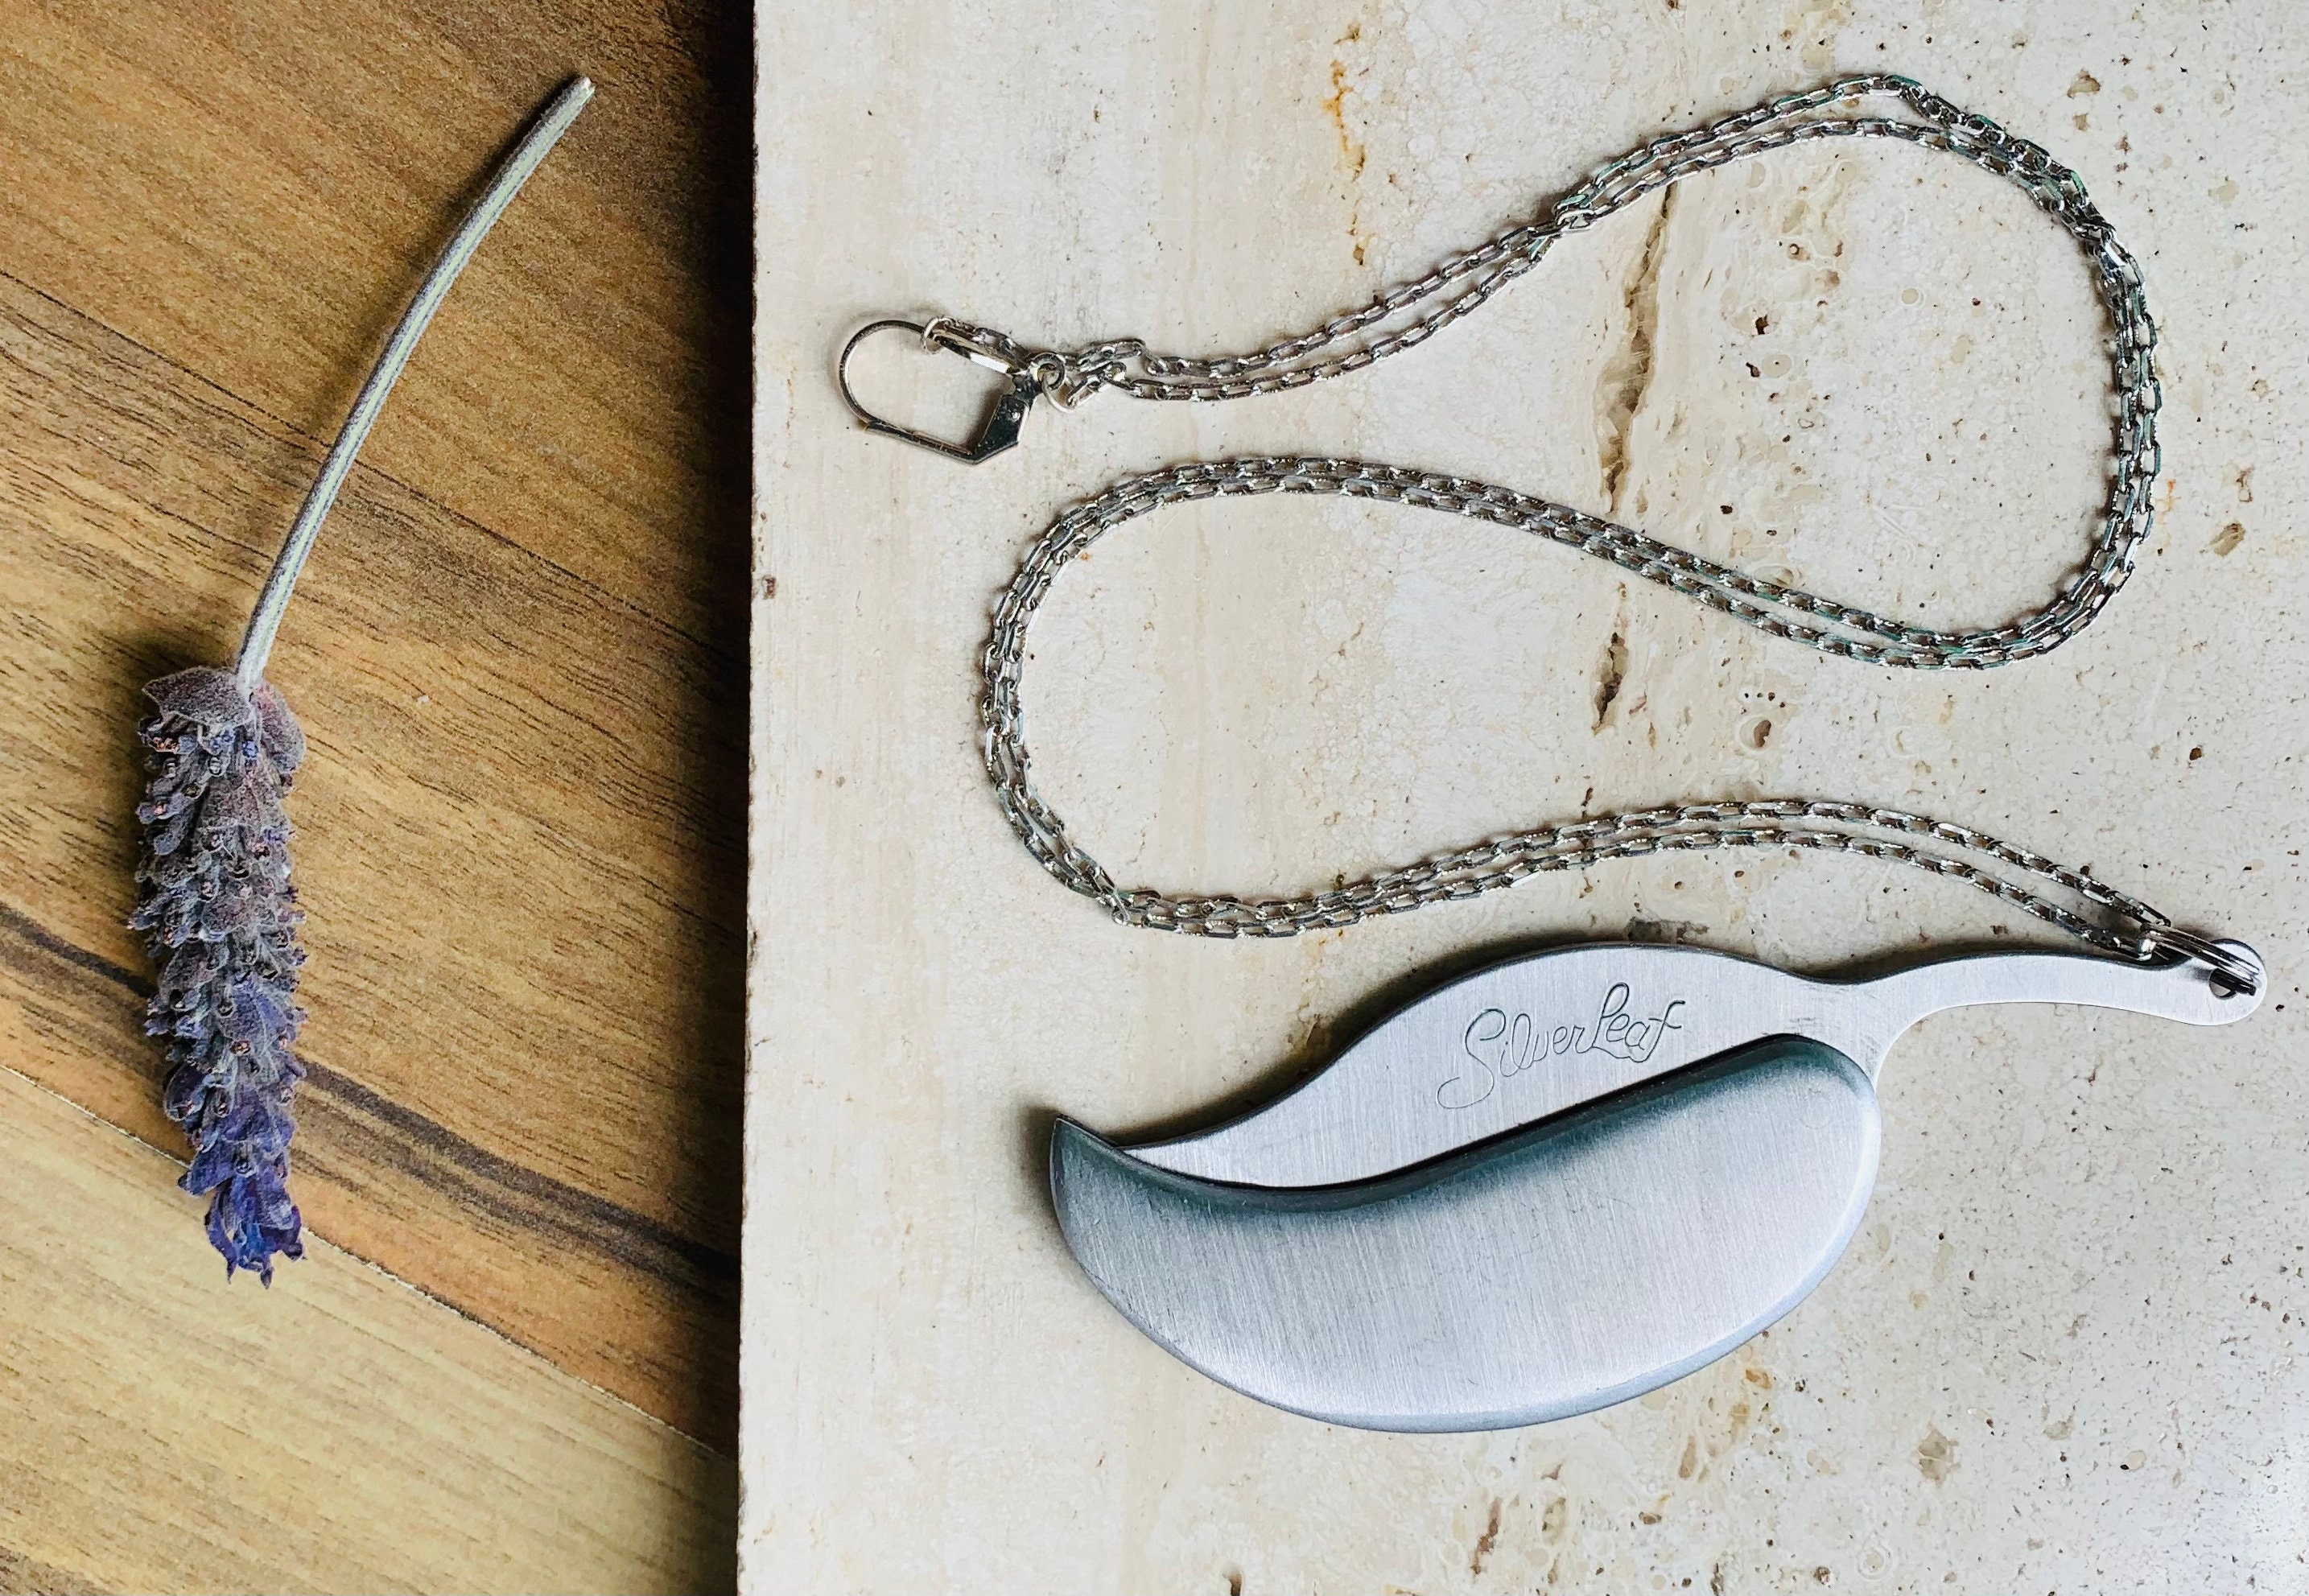 Pros & Cons of a Hidden Knife Necklace | Posts by Daniel Thomas | Bloglovin'